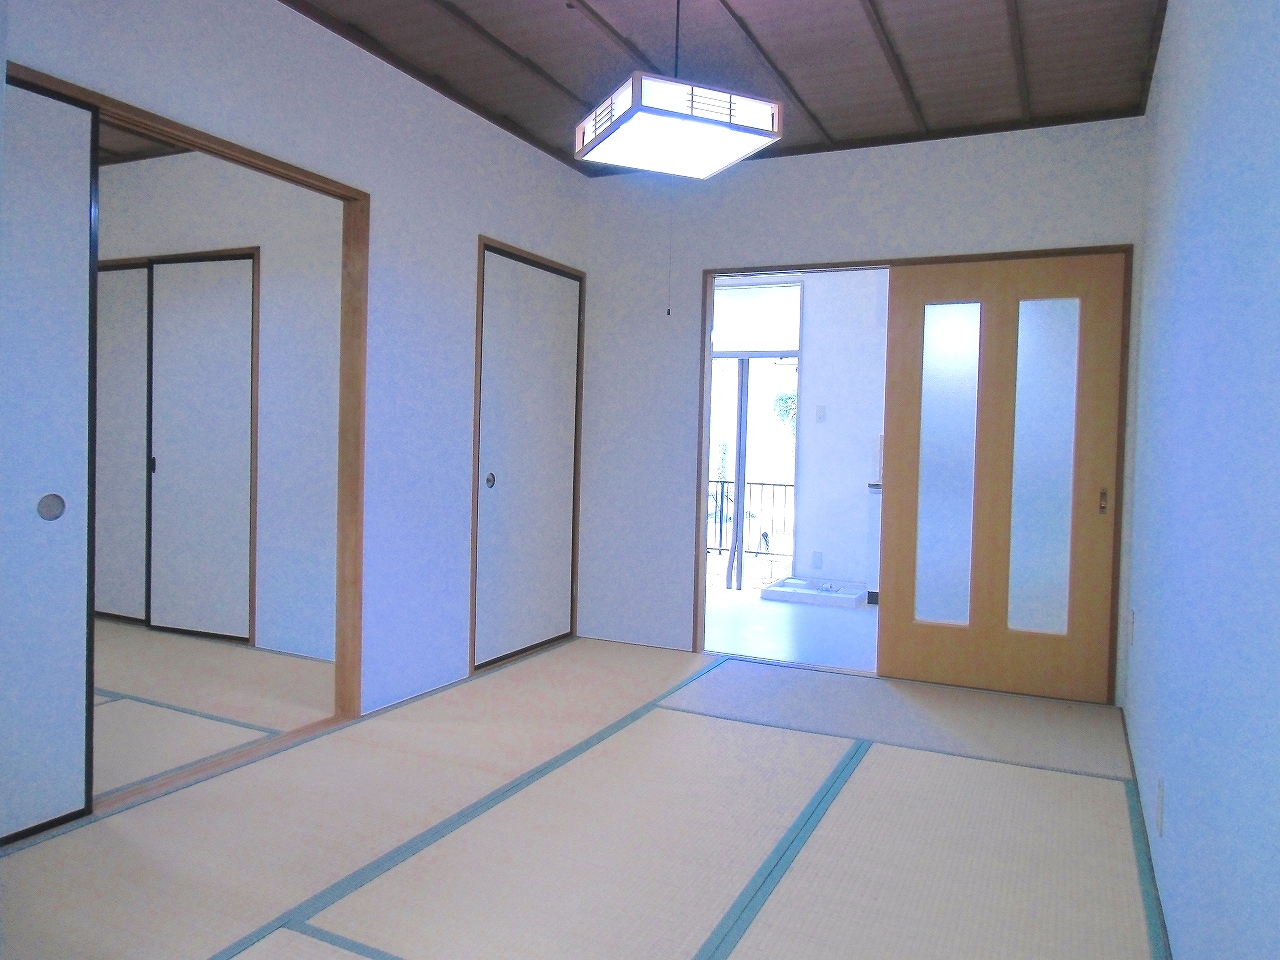 Living and room. I Japanese-style room is still calm